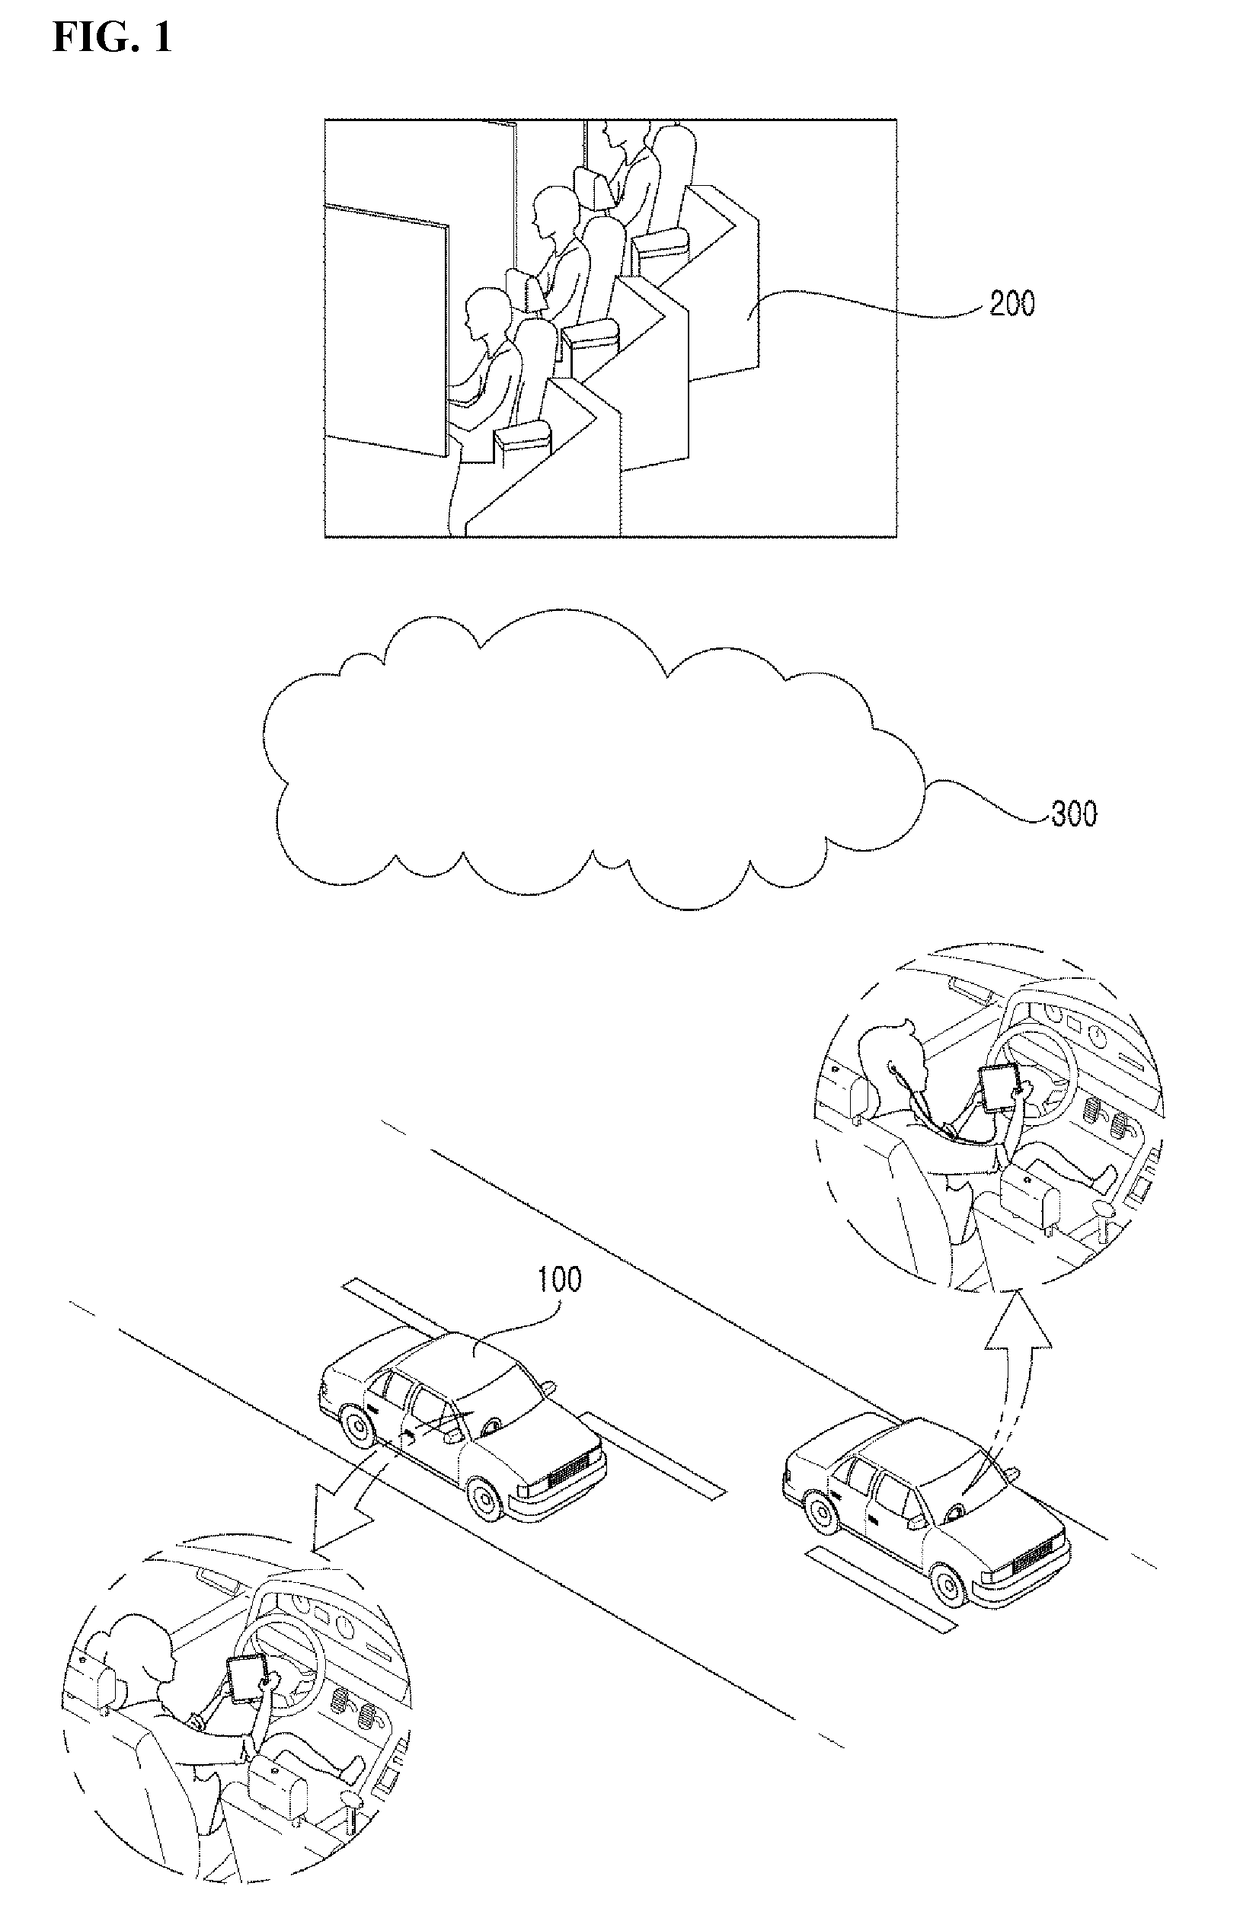 Apparatus and method for vehicle remote controlling and remote driving system